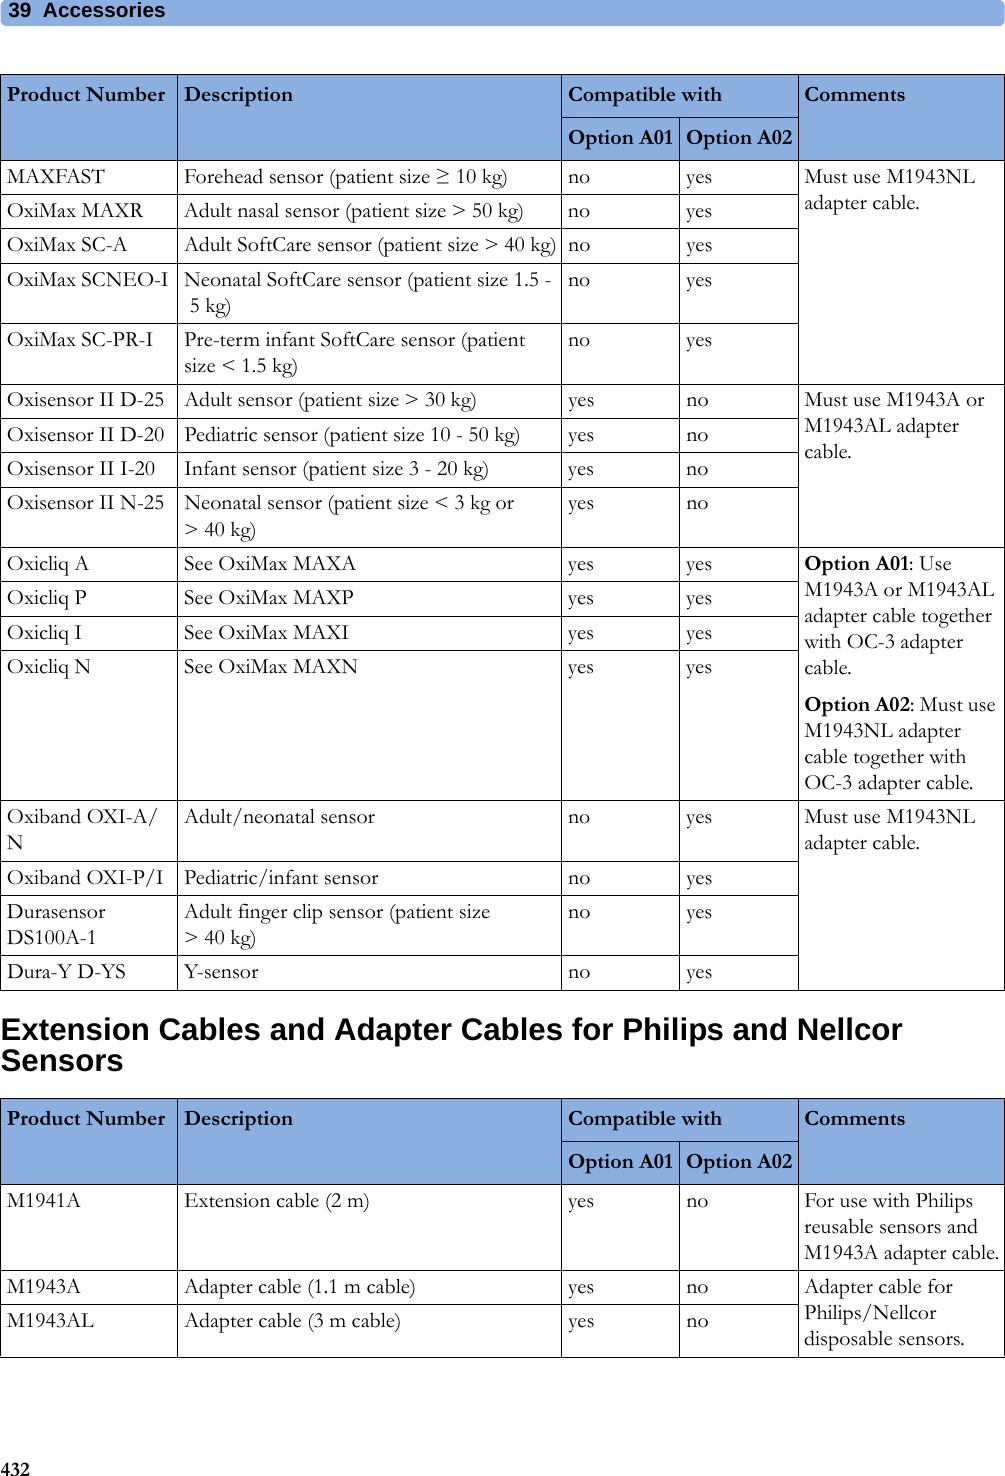 39 Accessories432Extension Cables and Adapter Cables for Philips and Nellcor SensorsMAXFAST Forehead sensor (patient size ≥10 kg) no yes Must use M1943NL adapter cable.OxiMax MAXR Adult nasal sensor (patient size &gt; 50 kg) no yesOxiMax SC-A Adult SoftCare sensor (patient size &gt; 40 kg) no yesOxiMax SCNEO-I Neonatal SoftCare sensor (patient size 1.5 -5kg)no yesOxiMax SC-PR-I Pre-term infant SoftCare sensor (patient size &lt; 1.5 kg)no yesOxisensor II D-25 Adult sensor (patient size &gt; 30 kg) yes no Must use M1943A or M1943AL adapter cable.Oxisensor II D-20 Pediatric sensor (patient size 10 - 50 kg) yes noOxisensor II I-20 Infant sensor (patient size 3 - 20 kg) yes noOxisensor II N-25 Neonatal sensor (patient size &lt; 3 kg or &gt;40kg)yes noOxicliq A See OxiMax MAXA yes yes Option A01: Use M1943A or M1943AL adapter cable together with OC-3 adapter cable.Option A02: Must use M1943NL adapter cable together with OC-3 adapter cable.Oxicliq P See OxiMax MAXP yes yesOxicliq I See OxiMax MAXI yes yesOxicliq N See OxiMax MAXN yes yesOxiband OXI-A/NAdult/neonatal sensor no yes Must use M1943NL adapter cable.Oxiband OXI-P/I Pediatric/infant sensor no yesDurasensor DS100A-1Adult finger clip sensor (patient size &gt;40kg)no yesDura-Y D-YS Y-sensor no yesProduct Number Description Compatible with CommentsOption A01 Option A02Product Number Description Compatible with CommentsOption A01 Option A02M1941A Extension cable (2 m) yes no For use with Philips reusable sensors and M1943A adapter cable.M1943A Adapter cable (1.1 m cable) yes no Adapter cable for Philips/Nellcor disposable sensors.M1943AL Adapter cable (3 m cable) yes no